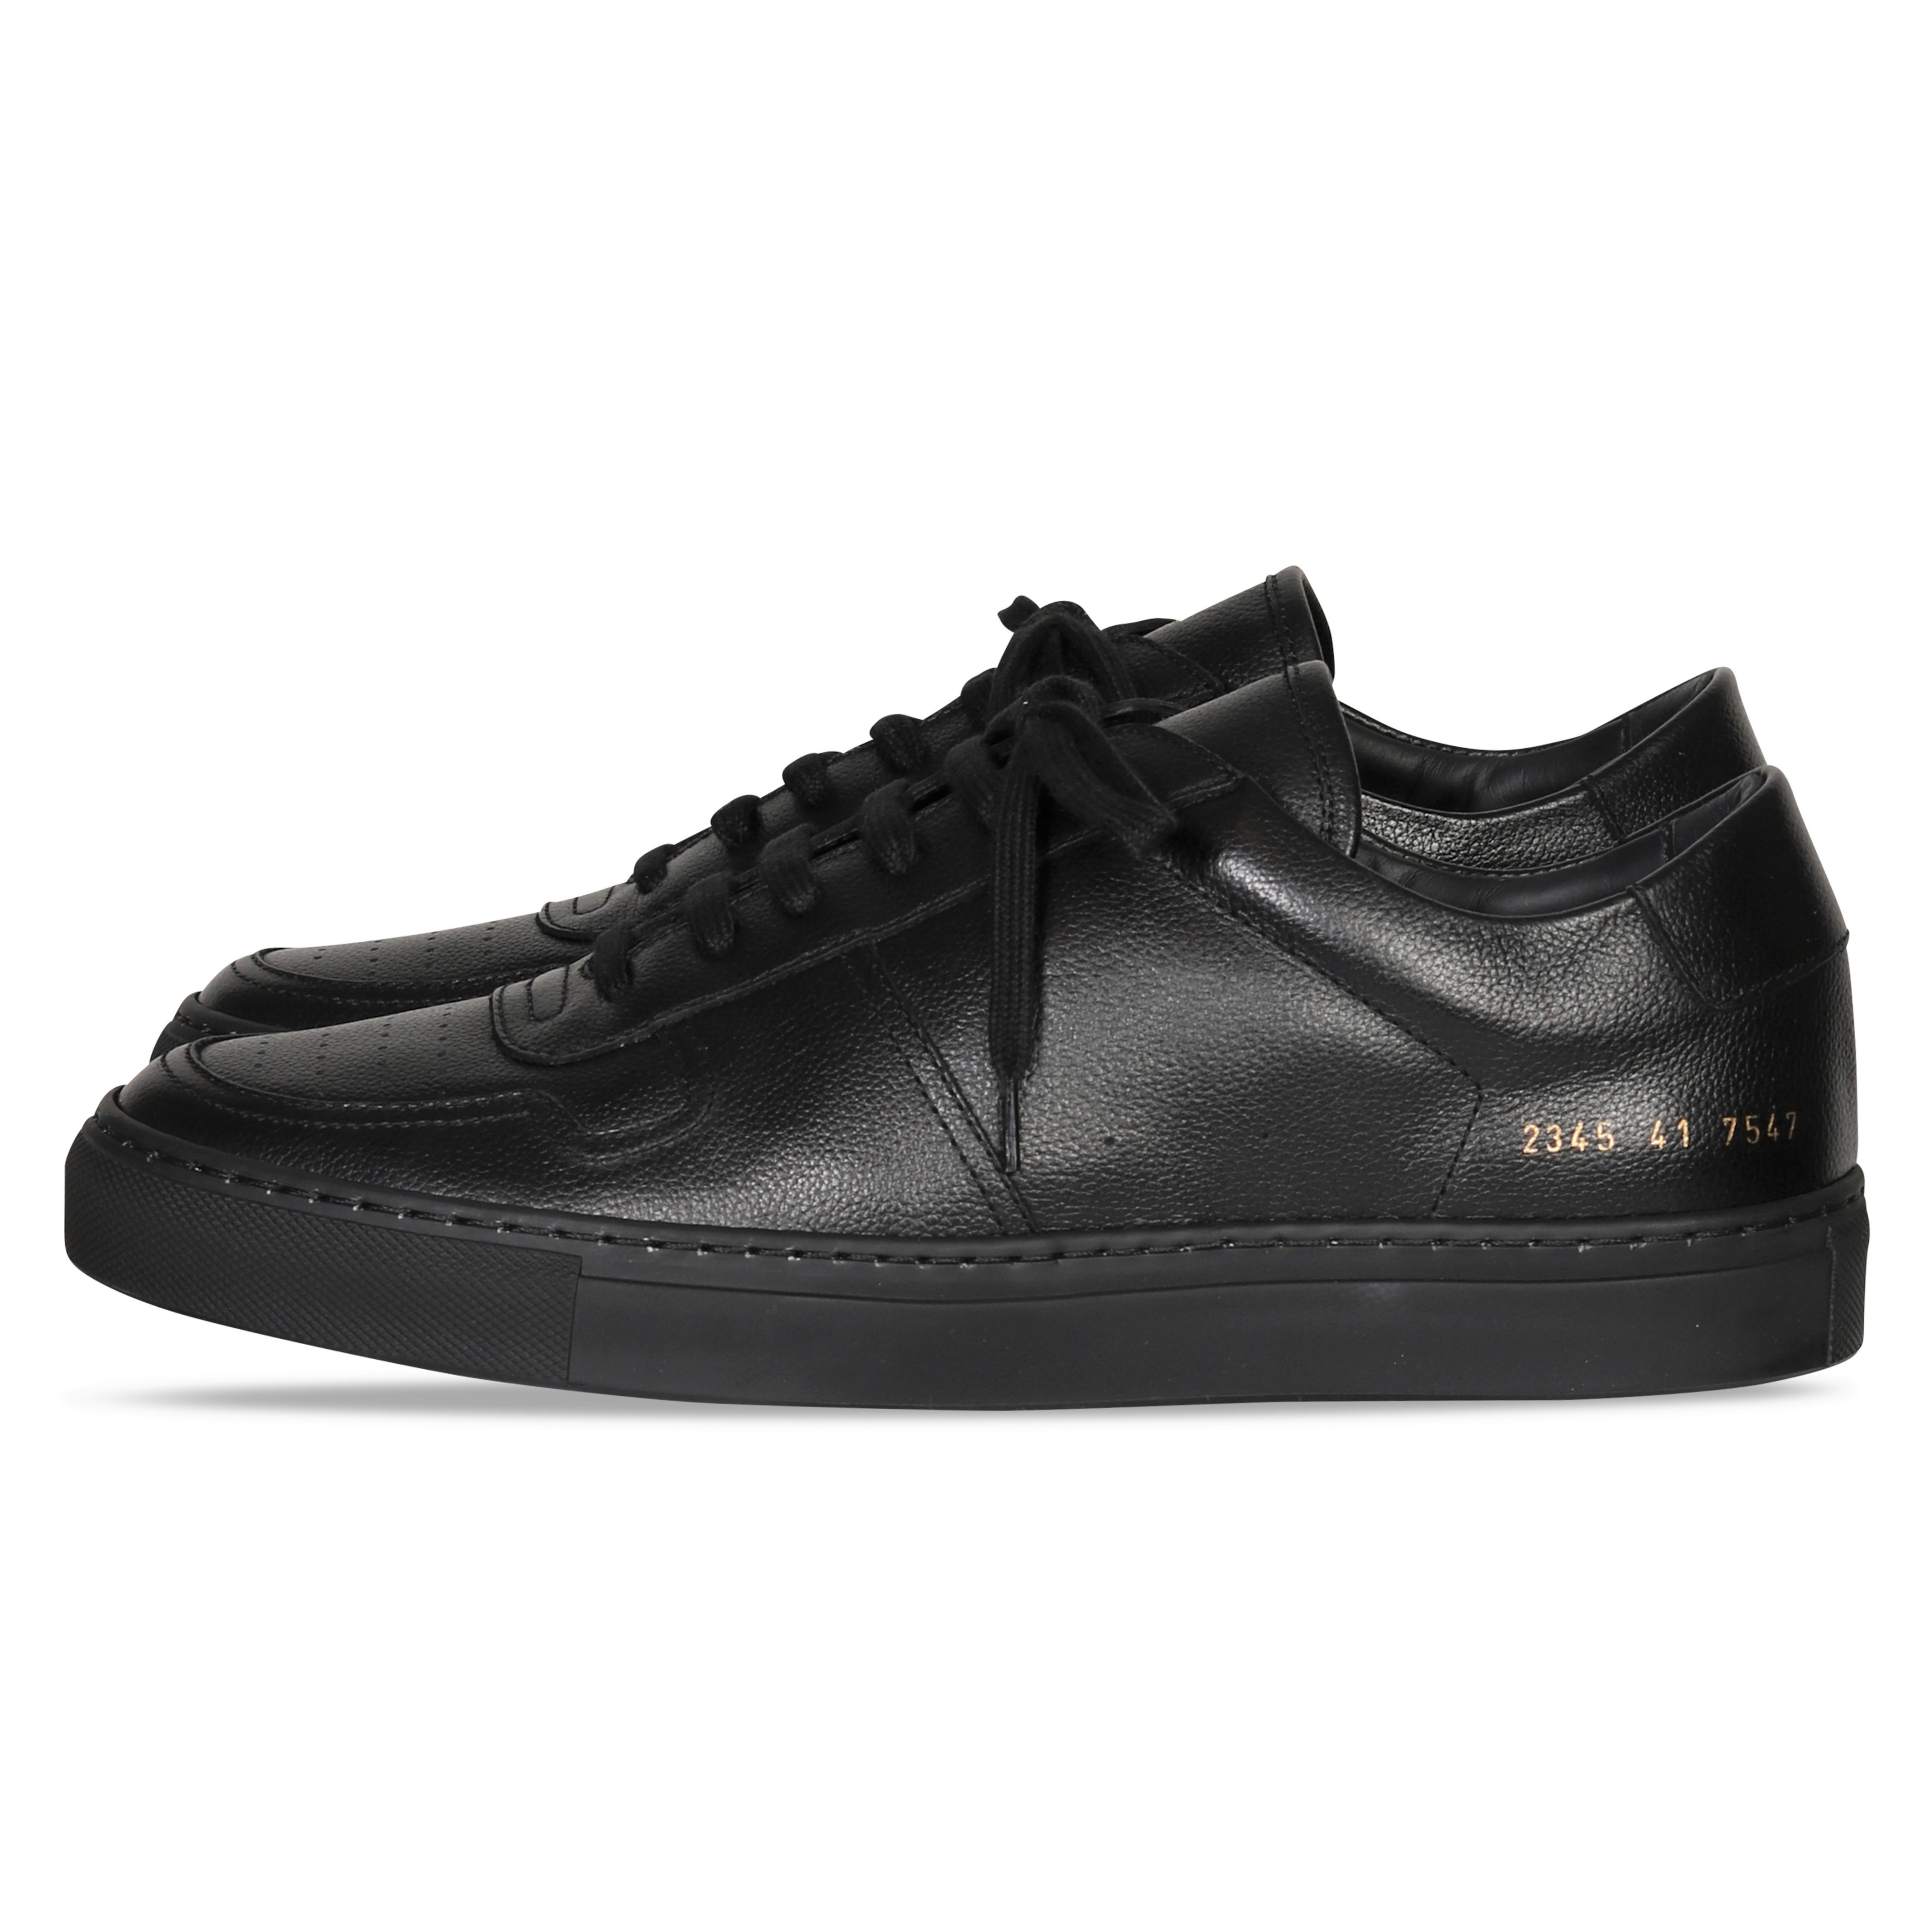 Common Projects Sneaker Bball Low Bumpy